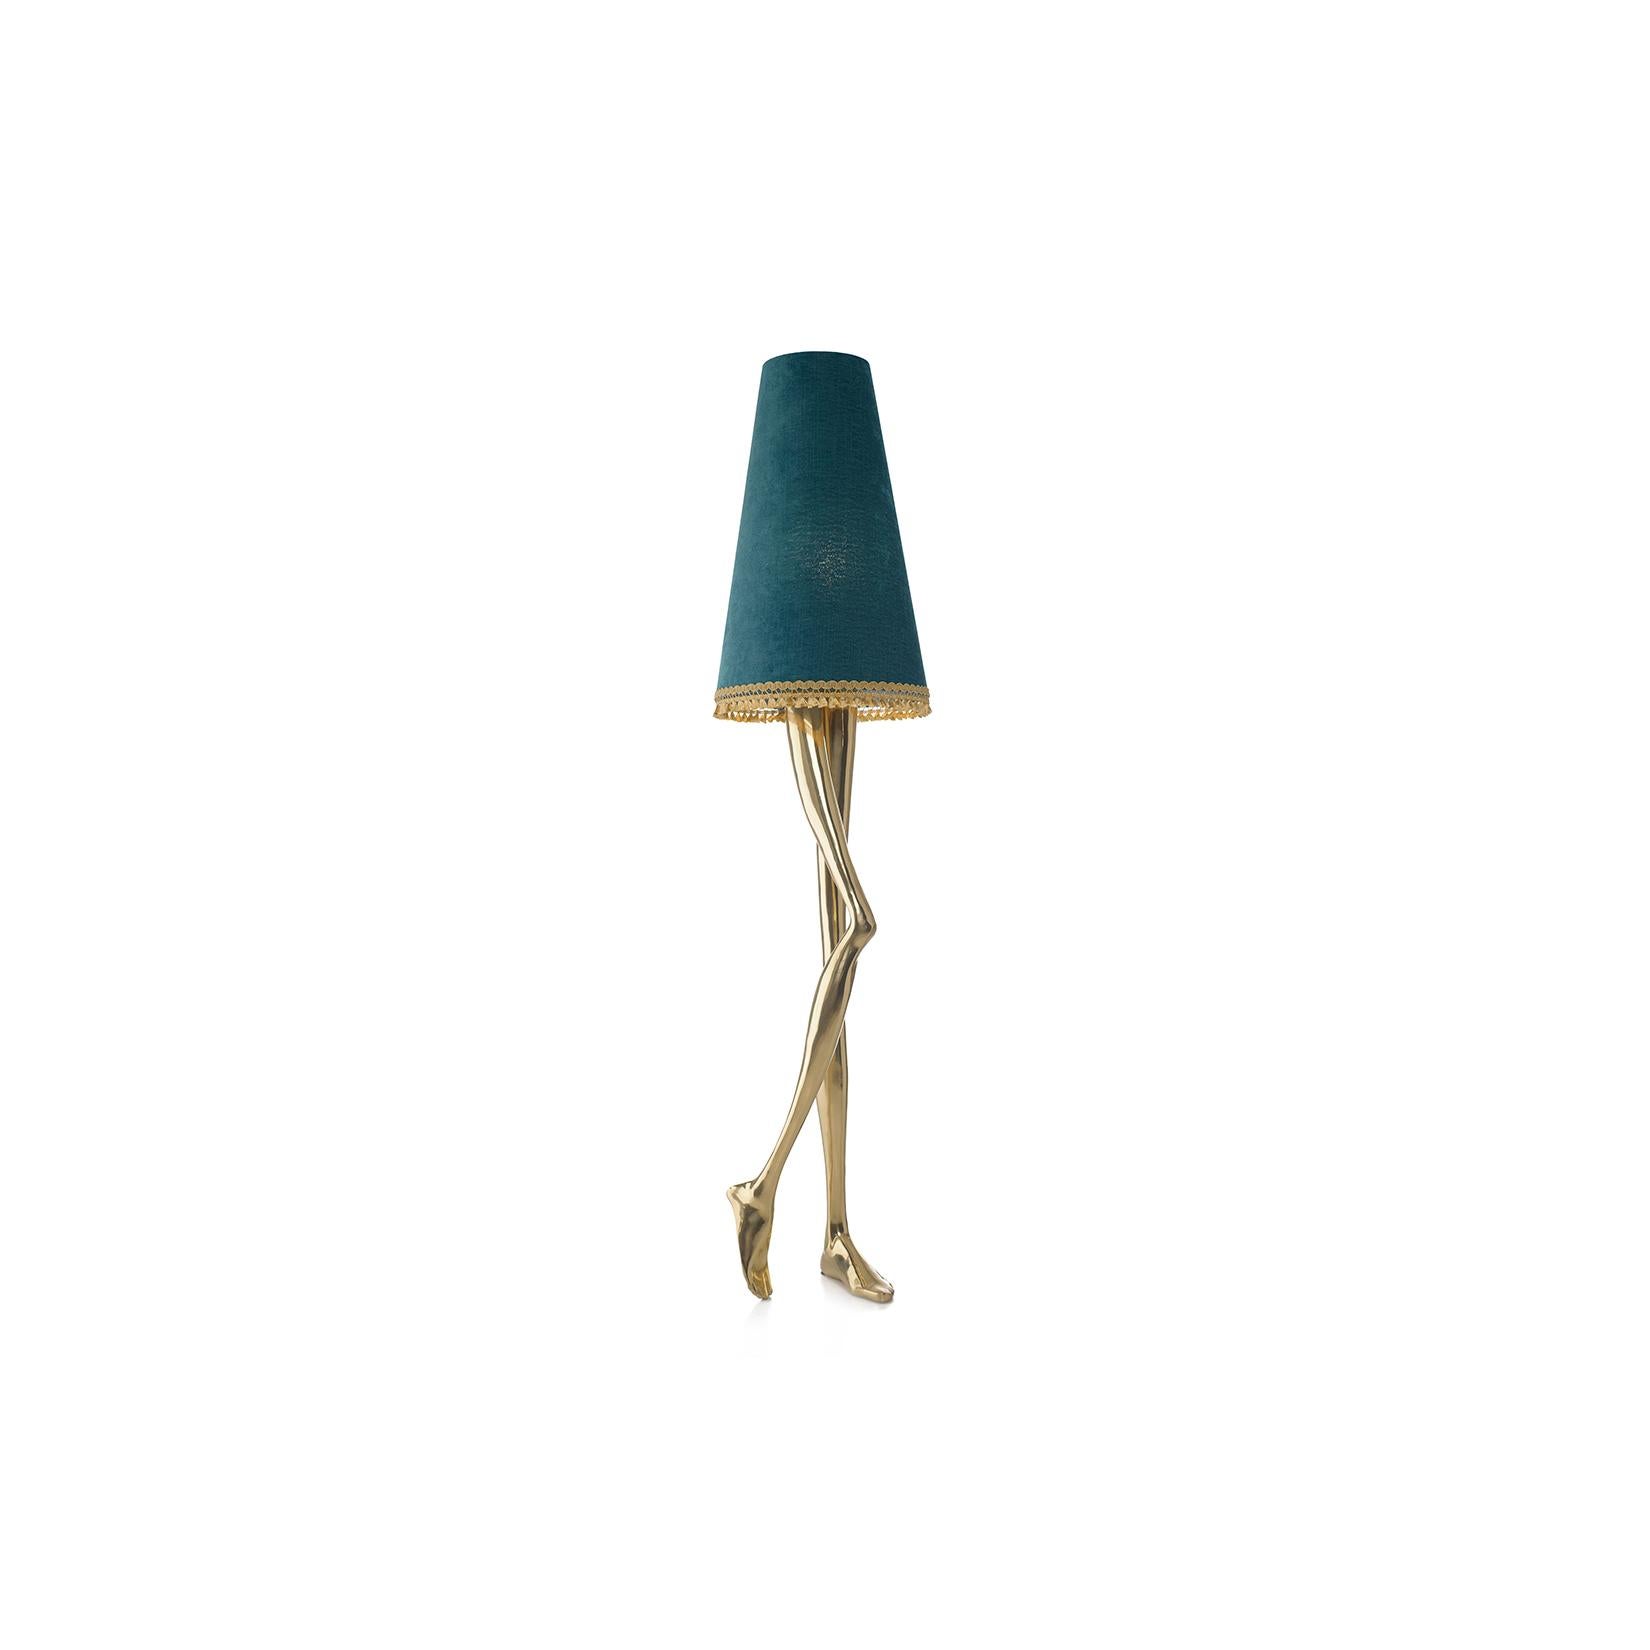 Contemporary Monroe Floor Lamp Polished Brass, Off White Lampshade, Art Lighting In New Condition For Sale In Oporto, PT